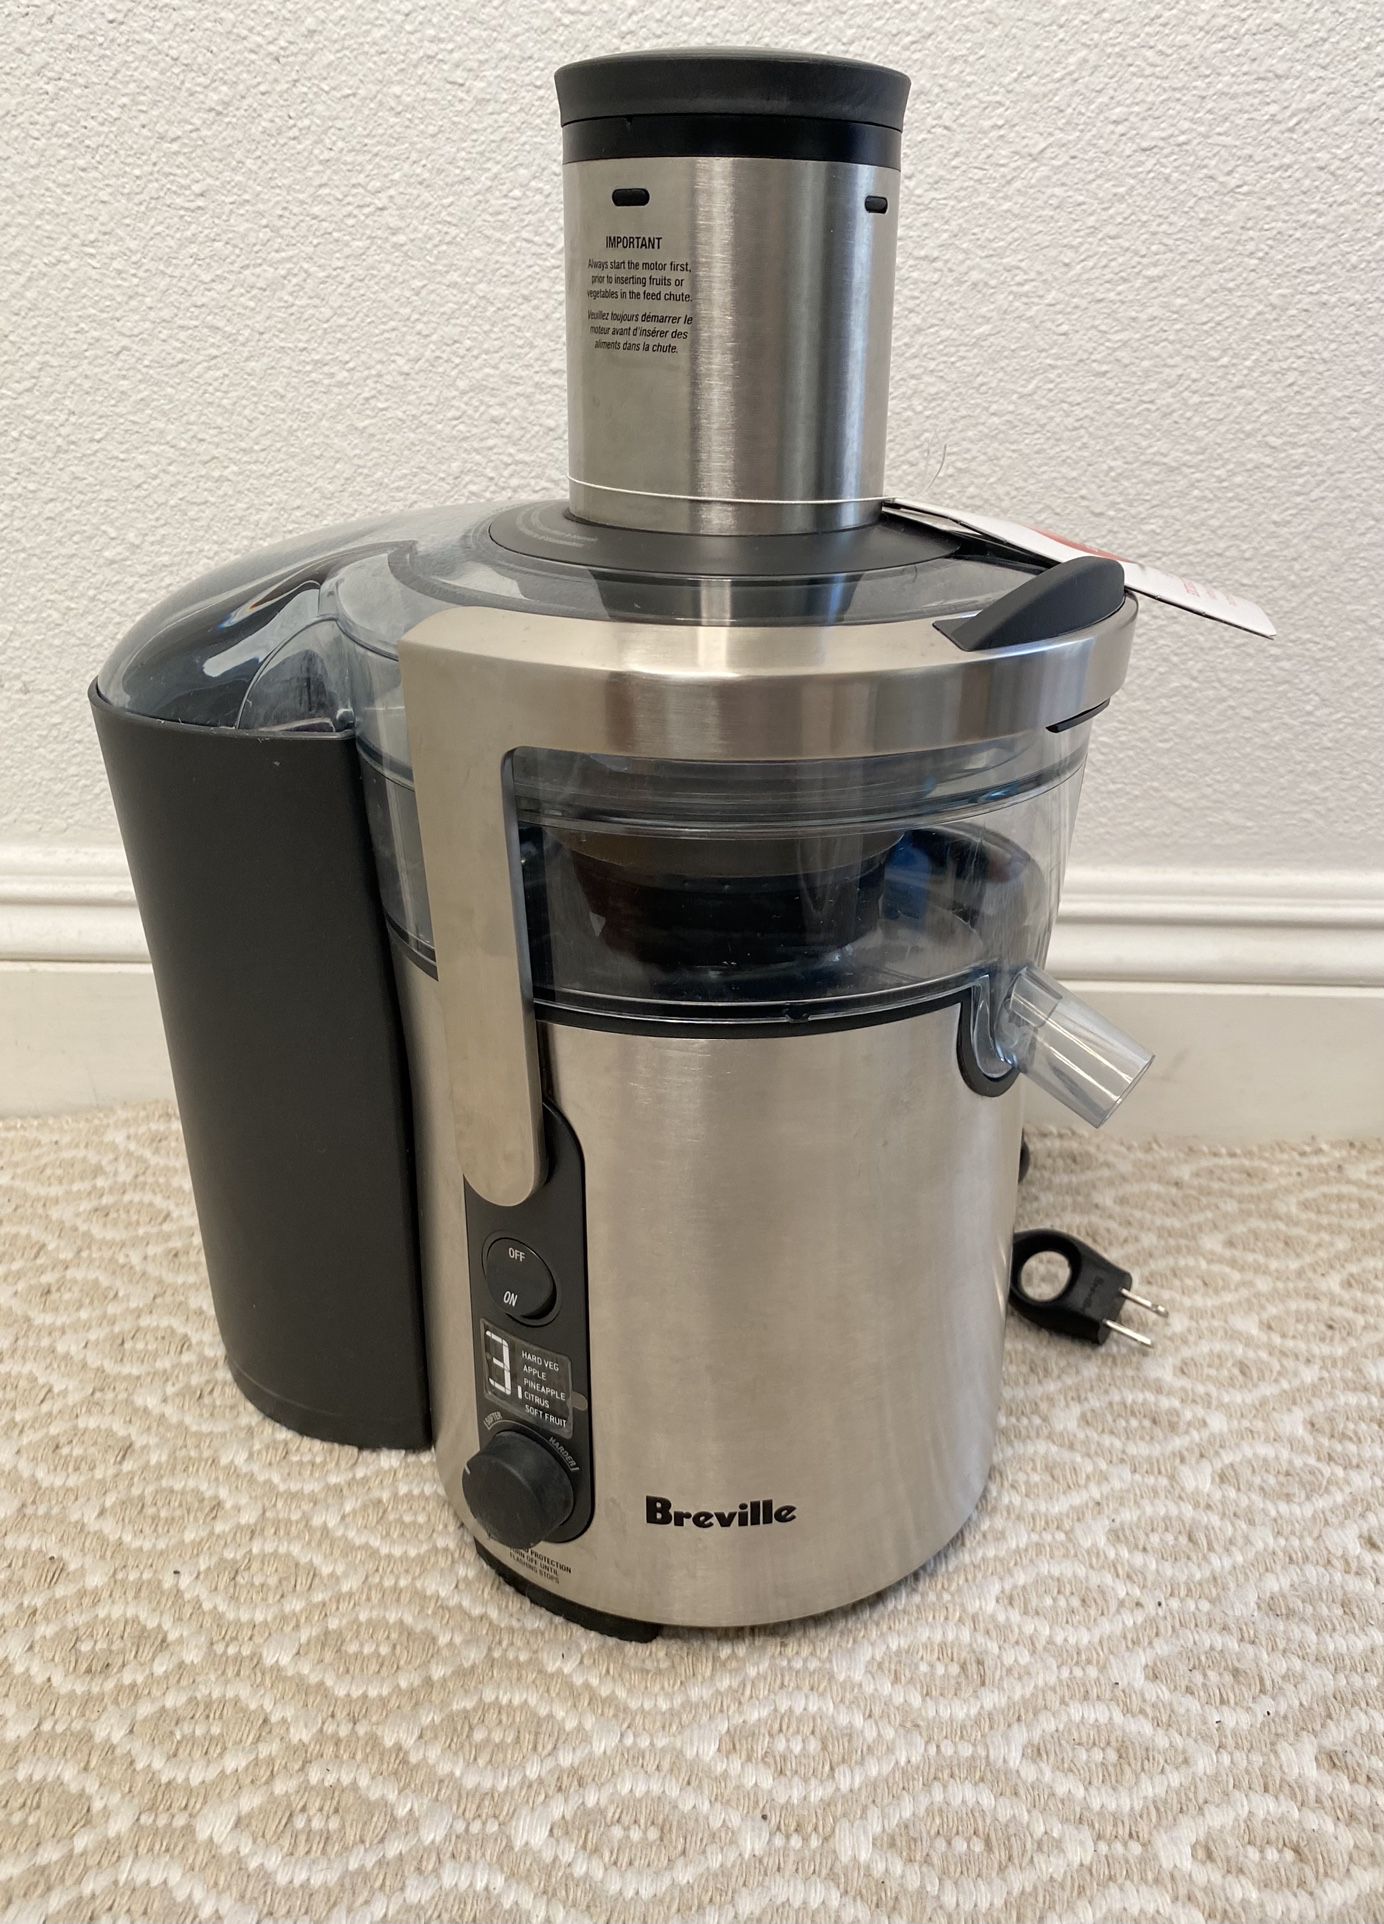 Breville The Juice Fountain Multi-Speed BJE510XL 5 Speed Stainless Steal Juicer